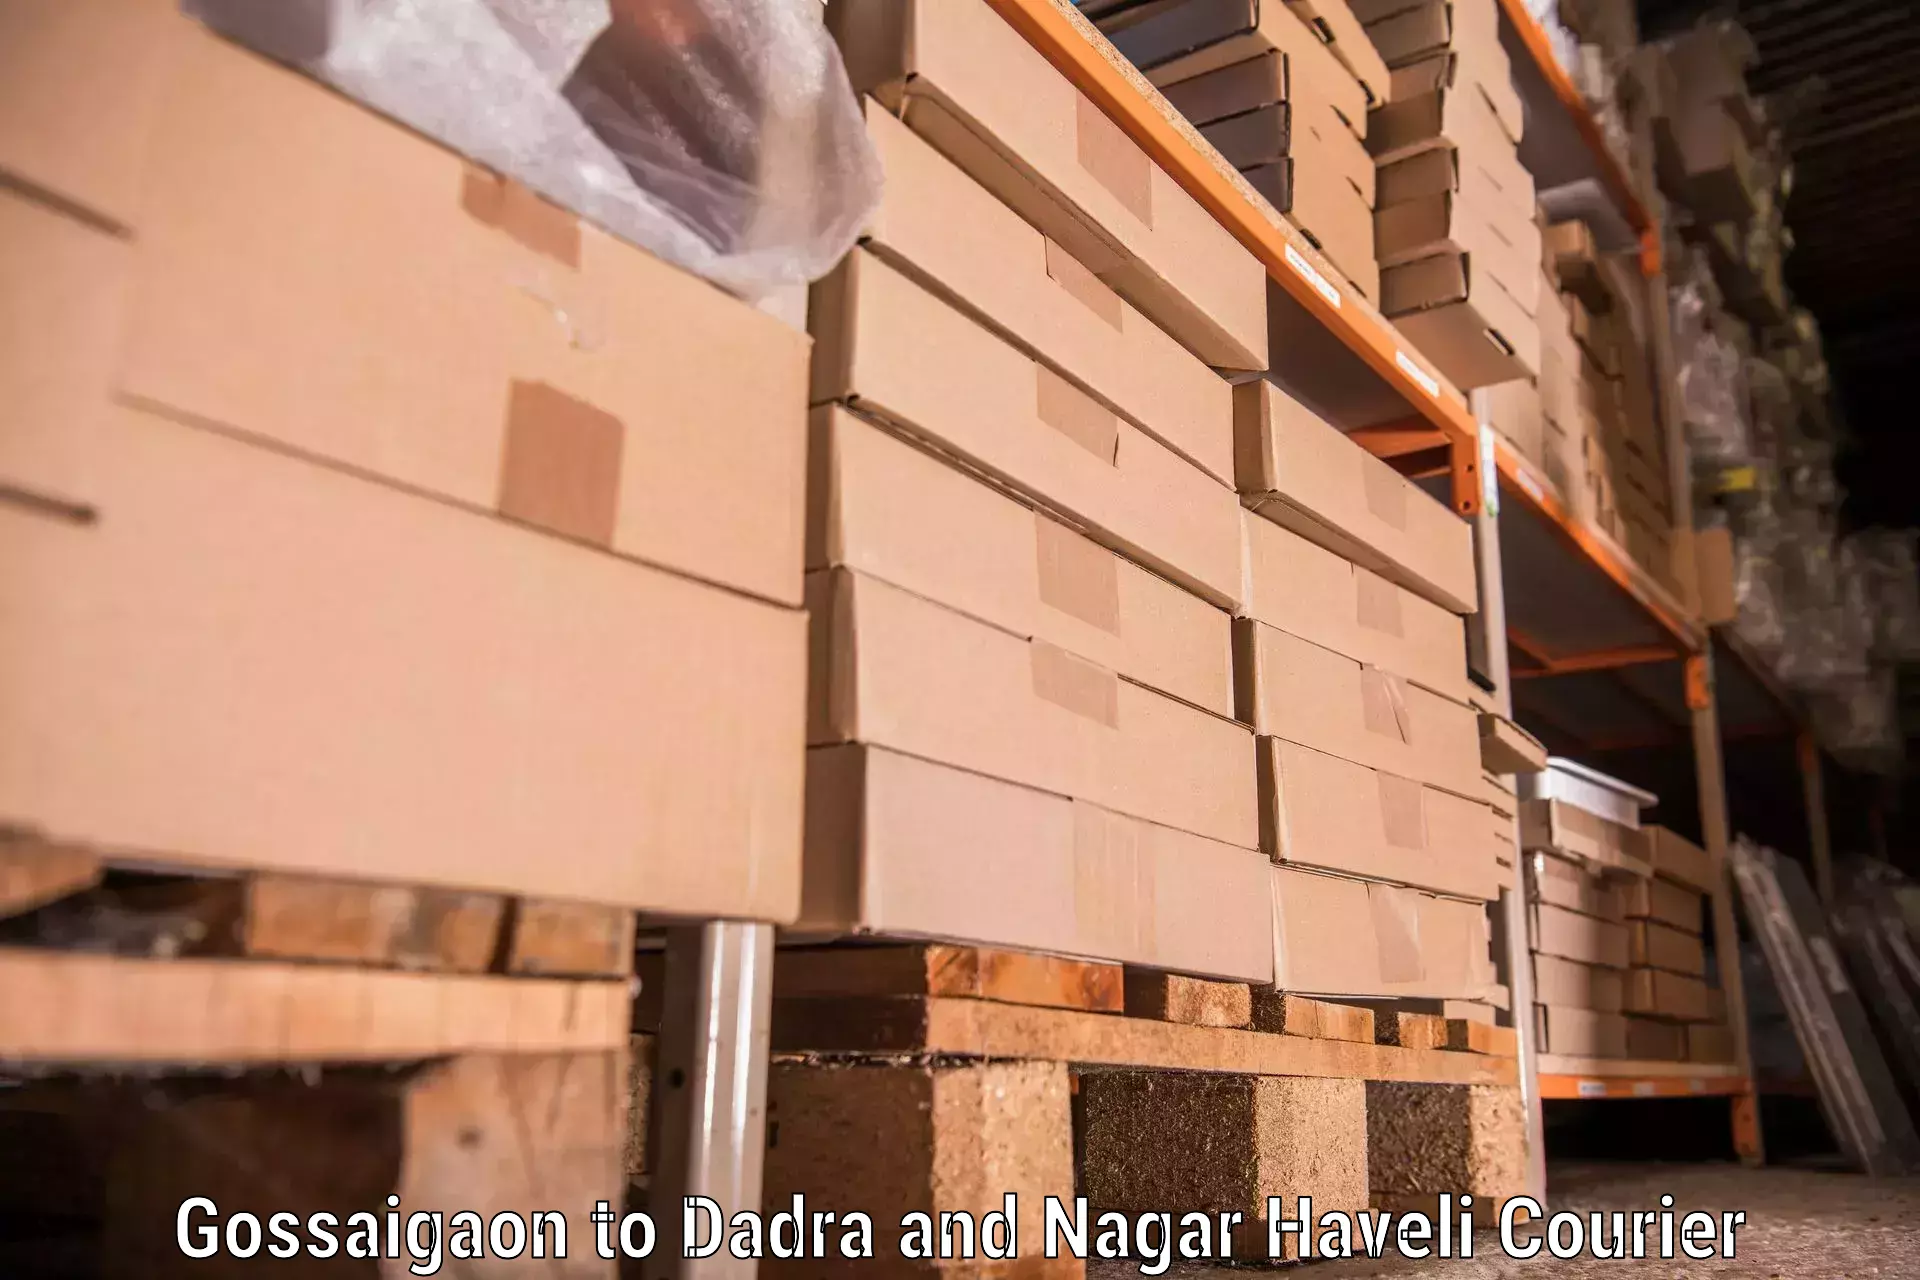 Efficient relocation services in Gossaigaon to Dadra and Nagar Haveli